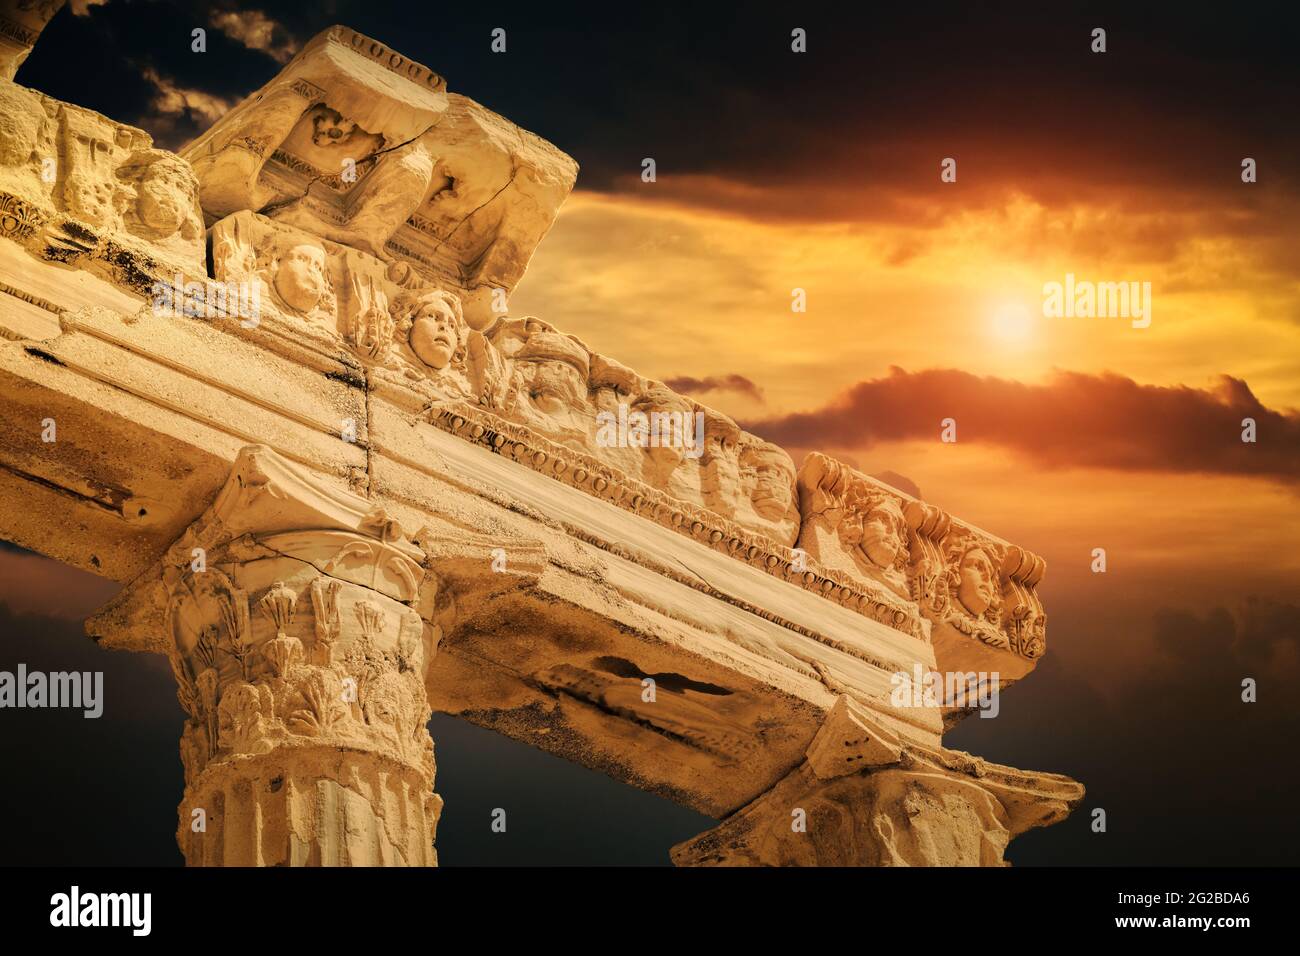 Very high detailed closeup photo of faces and columns of beautiful Apollon Temple in the ruins of Side Antique city during sunset, Antalya-Turkey. Stock Photo